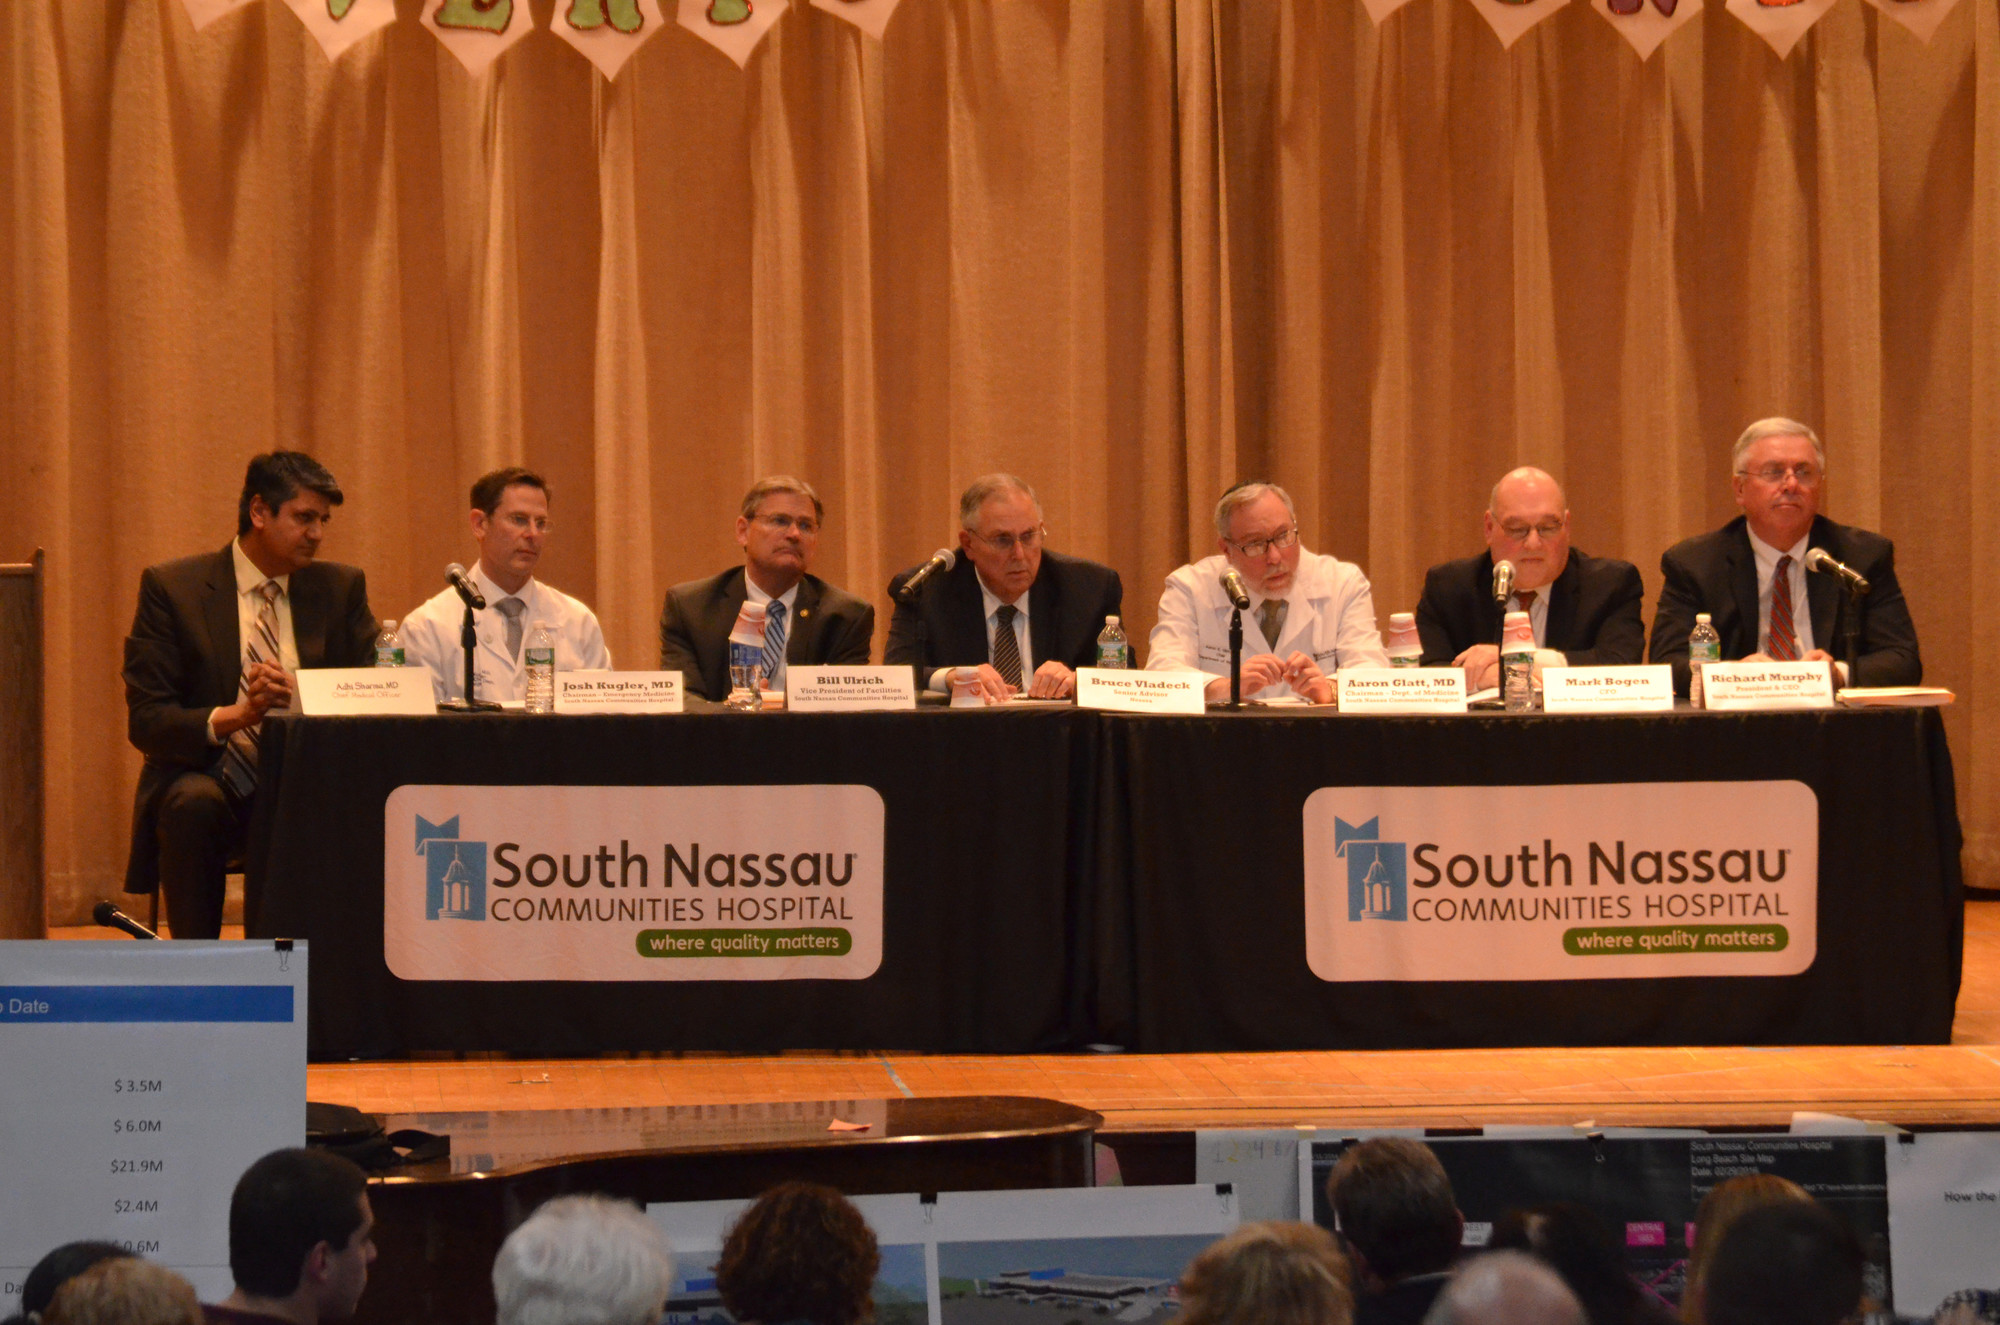 South Nassau Communities Hospital representatives presented the results of a study that concluded that a full-service hospital with 50 beds would lose more than $10 million per year.